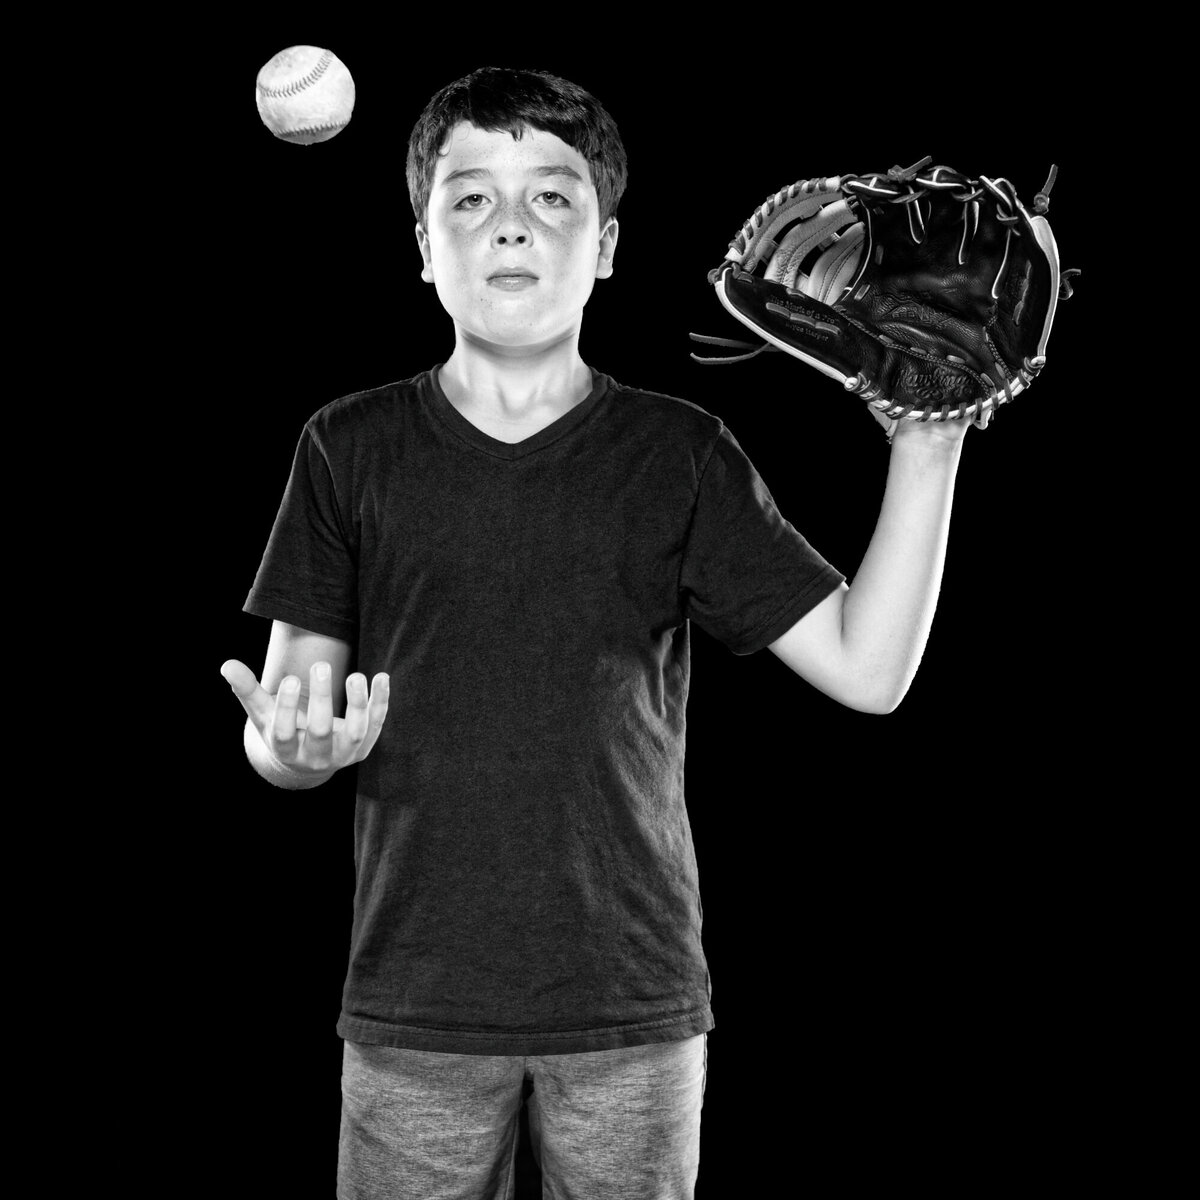 boy with baseball and glove black white portrait